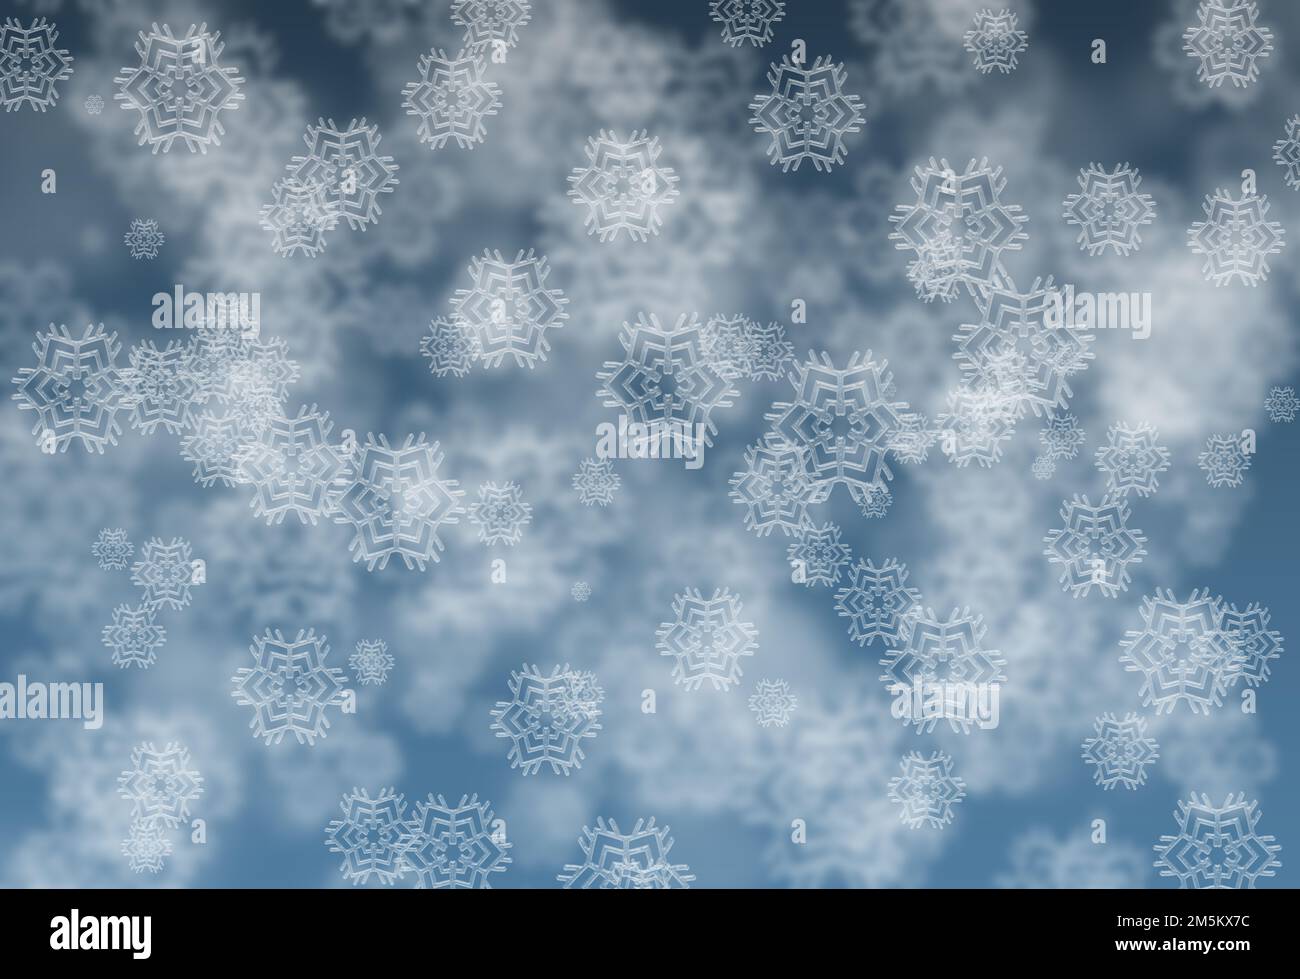 Digitally created image of Abstract blue snowflakes background. Stock Photo